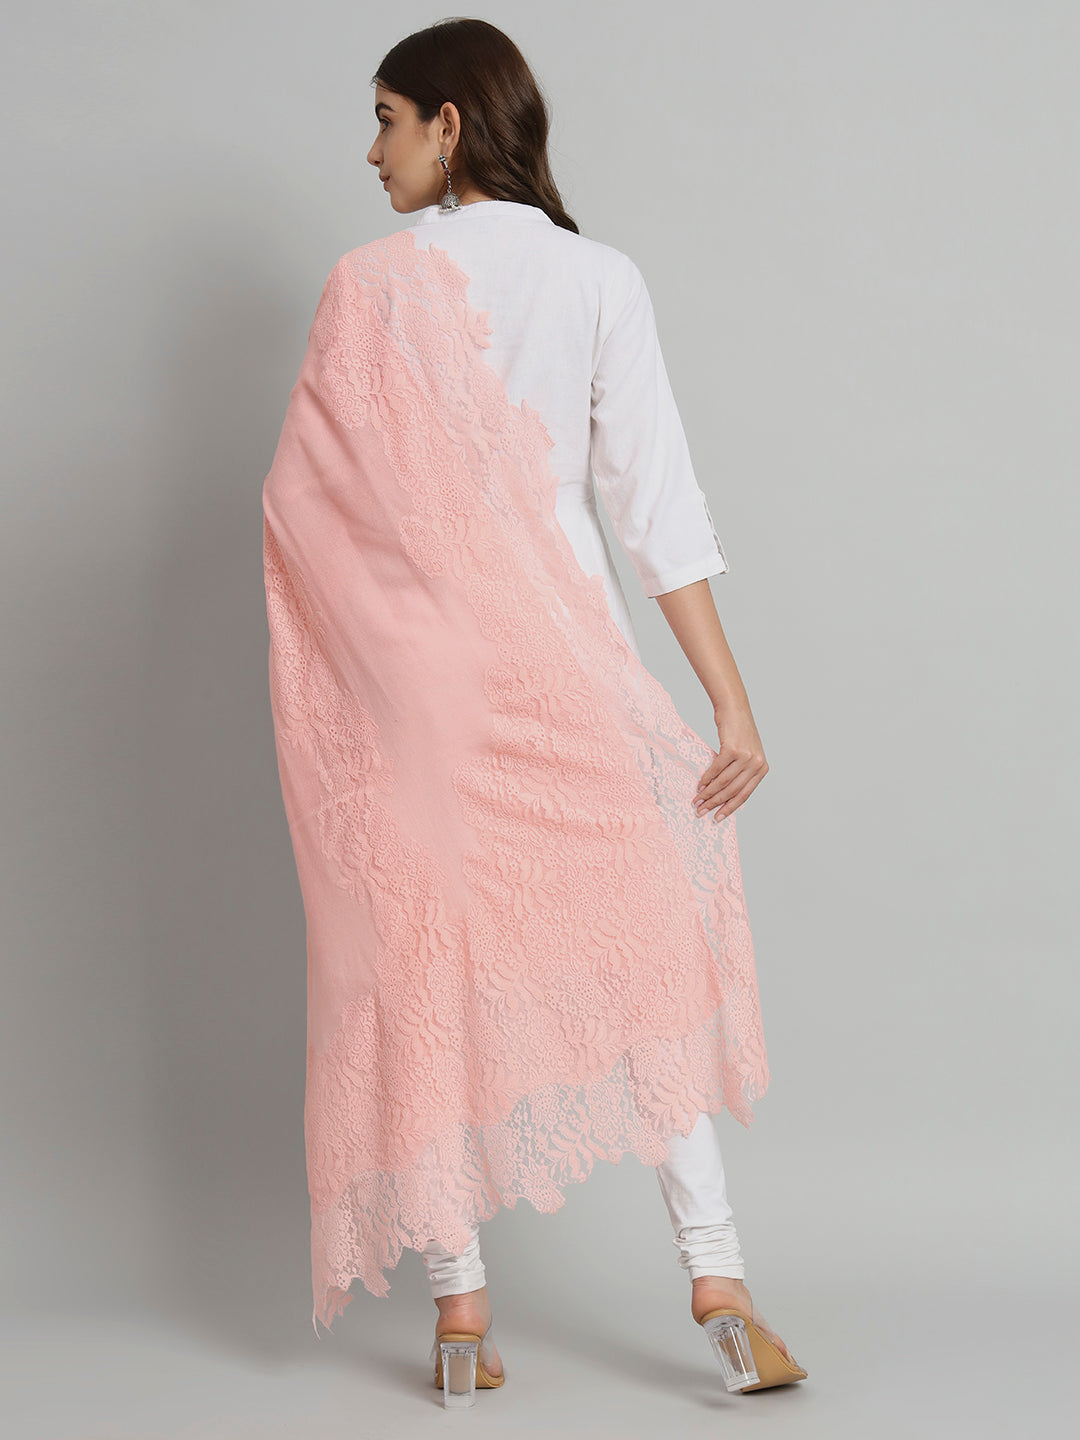 peach colour shawl, pink stole for wedding